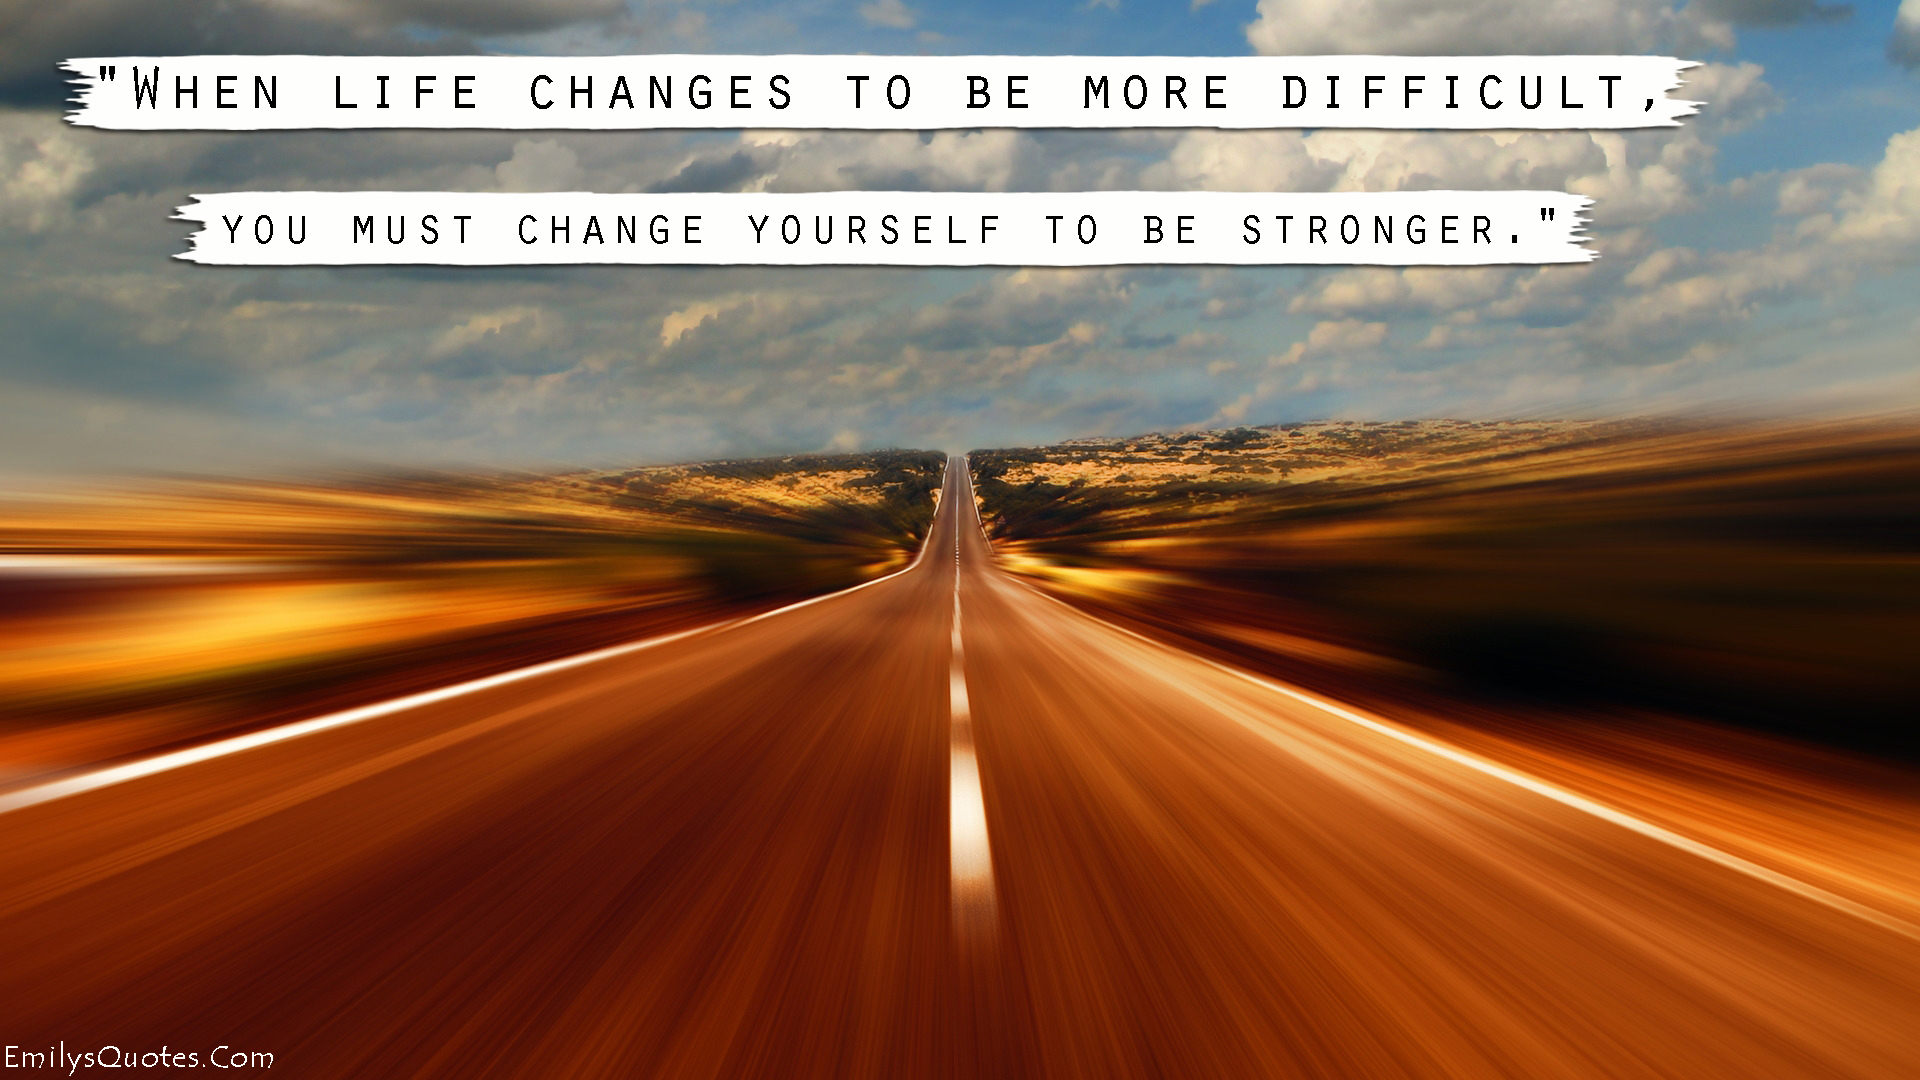 When life changes to be more difficult, you must change yourself to be stronger